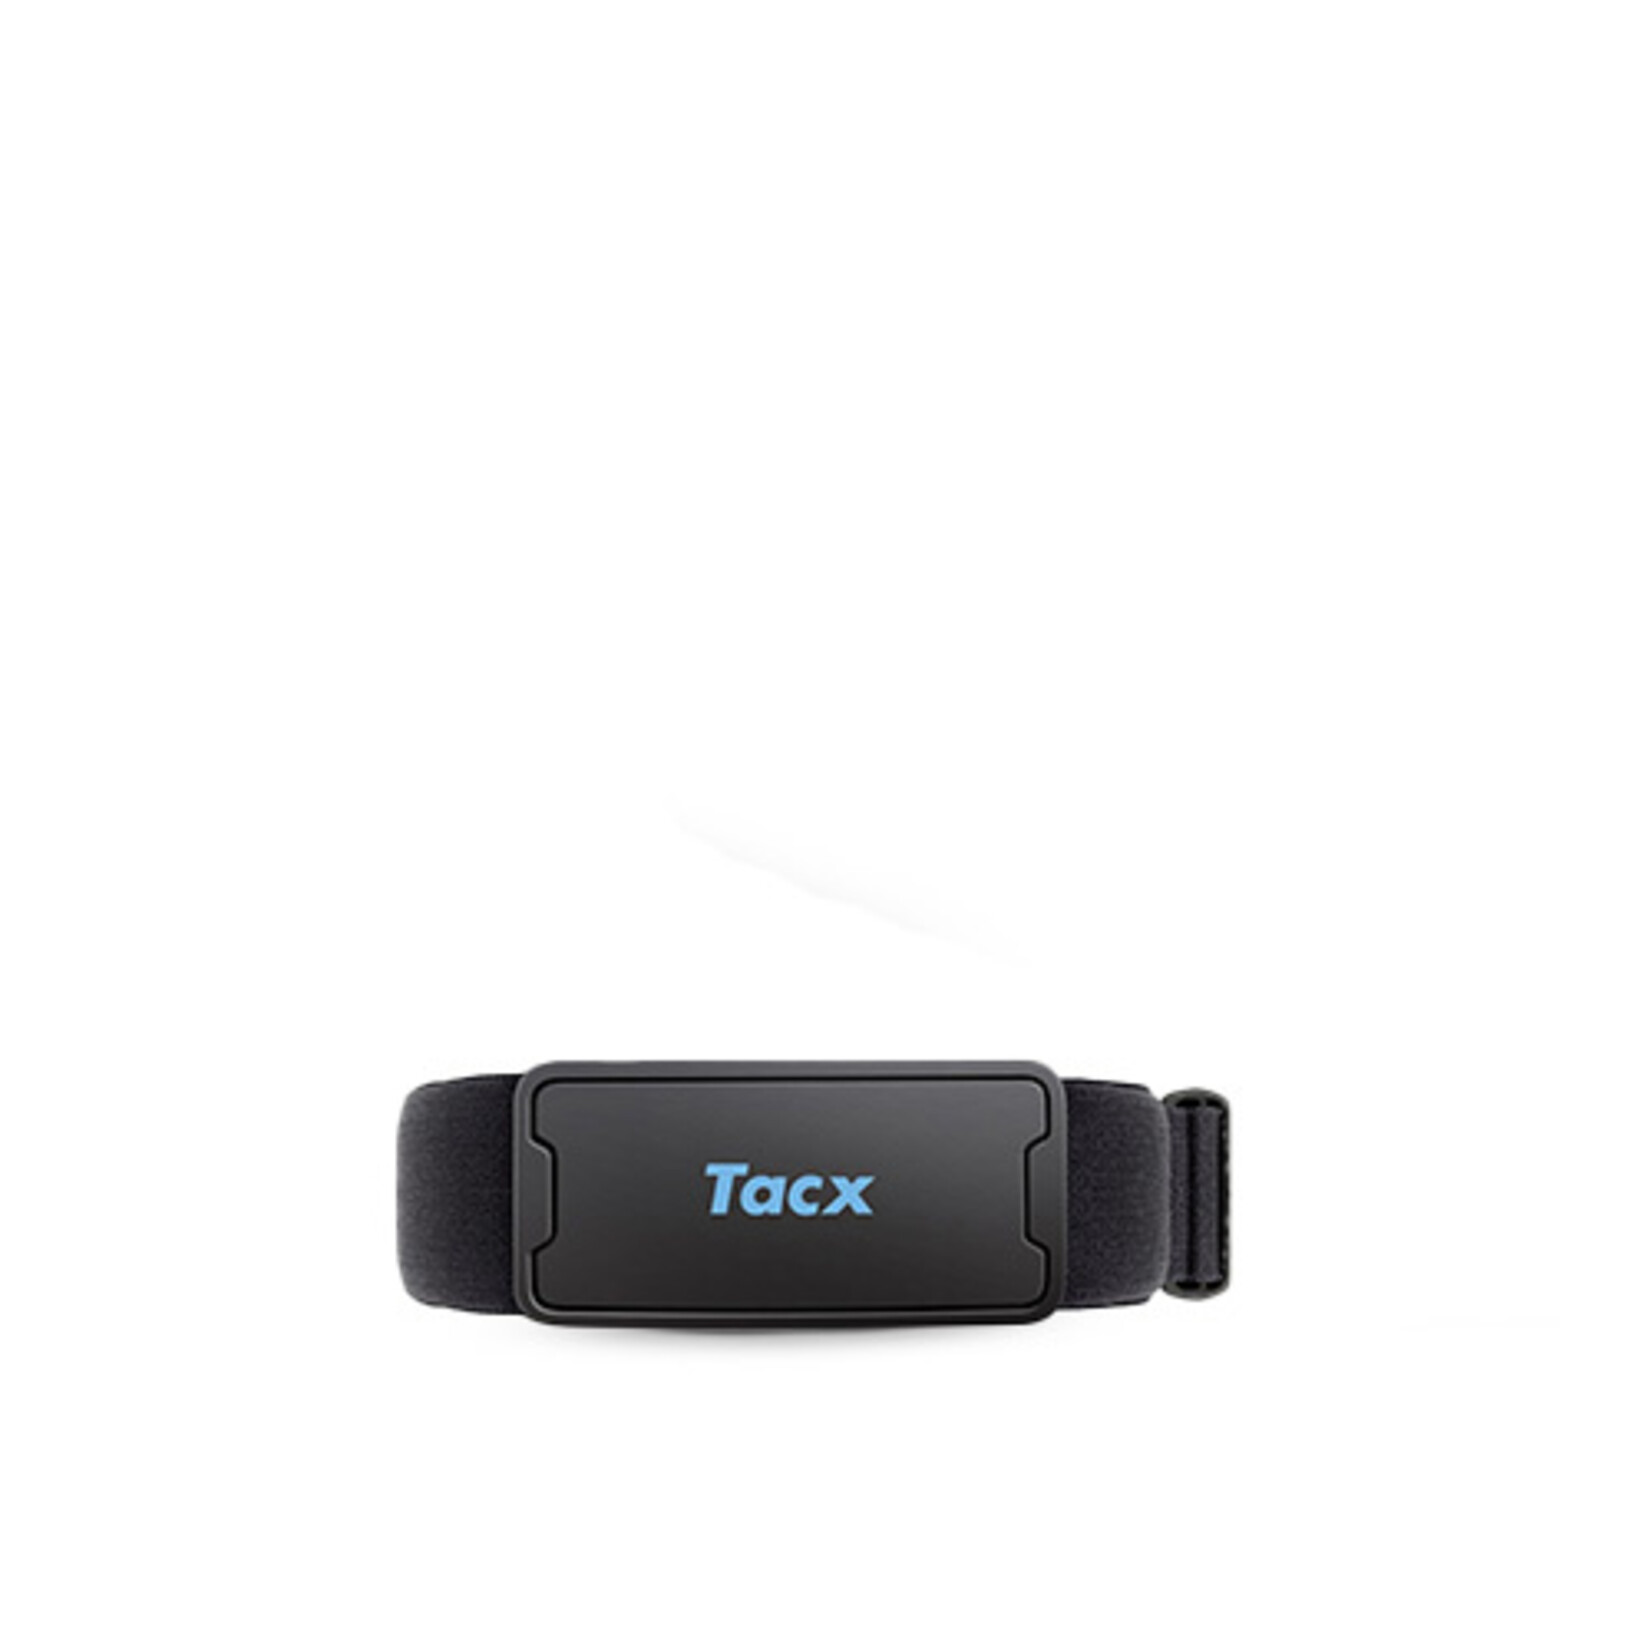 Tacx TACX HEART RATE BELT (BLUETOOTH/ANT+)